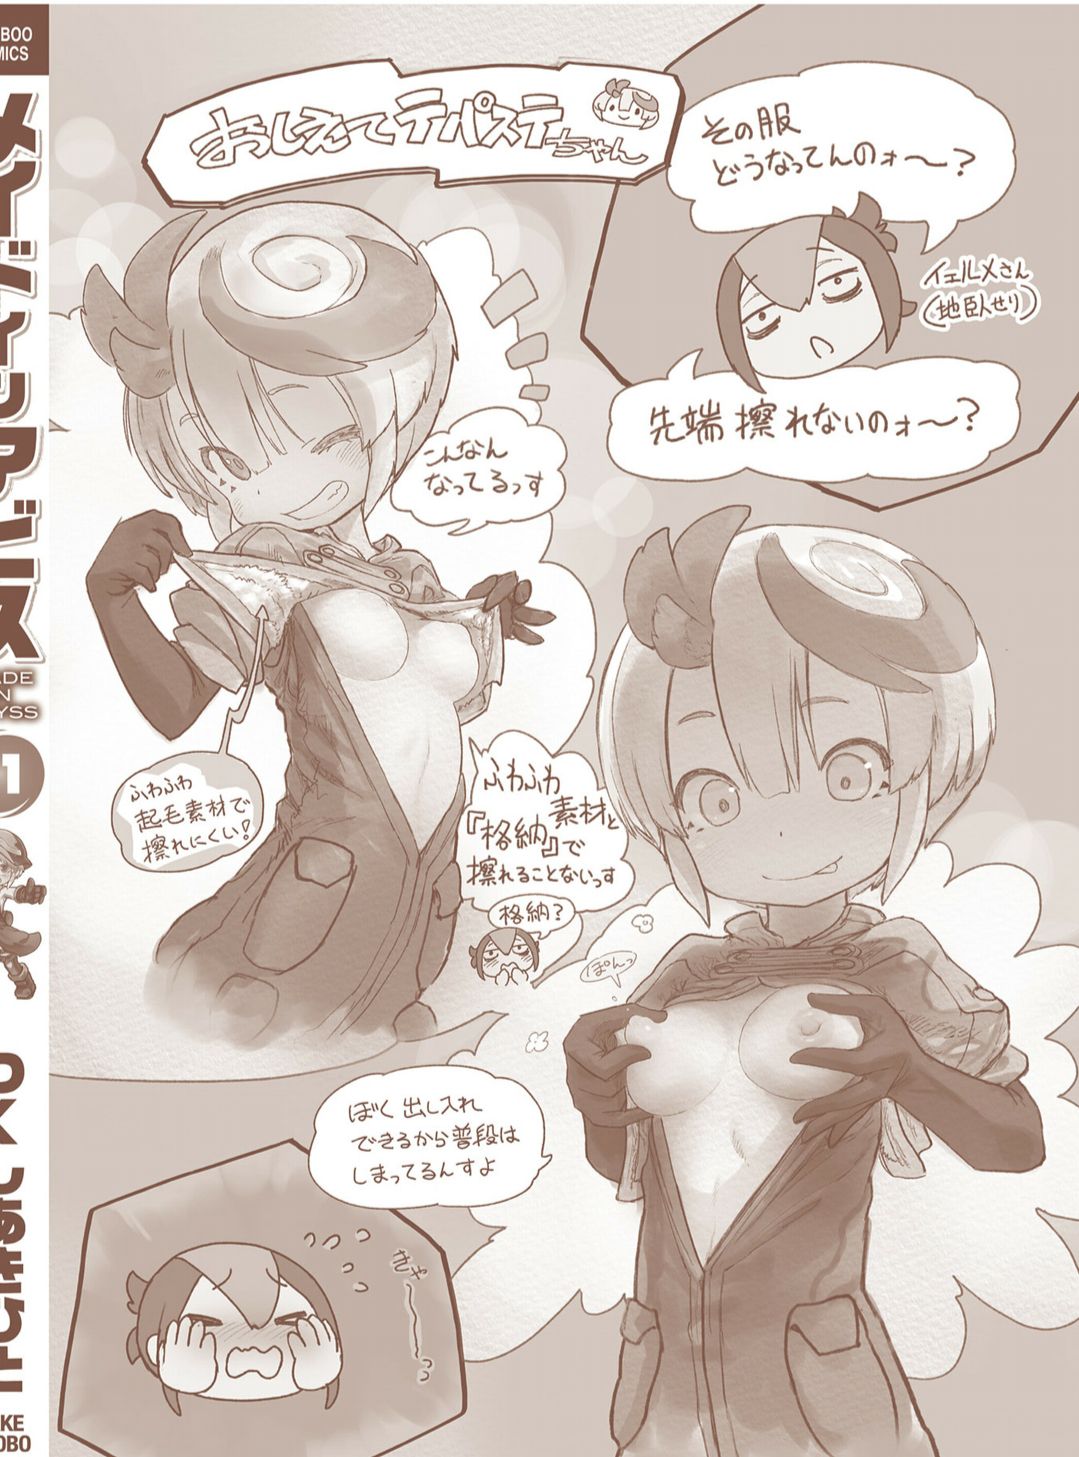 【Sad news】 Made in Abyss latest book, finally lifting the ban on girls' nipples wwwwwww 2